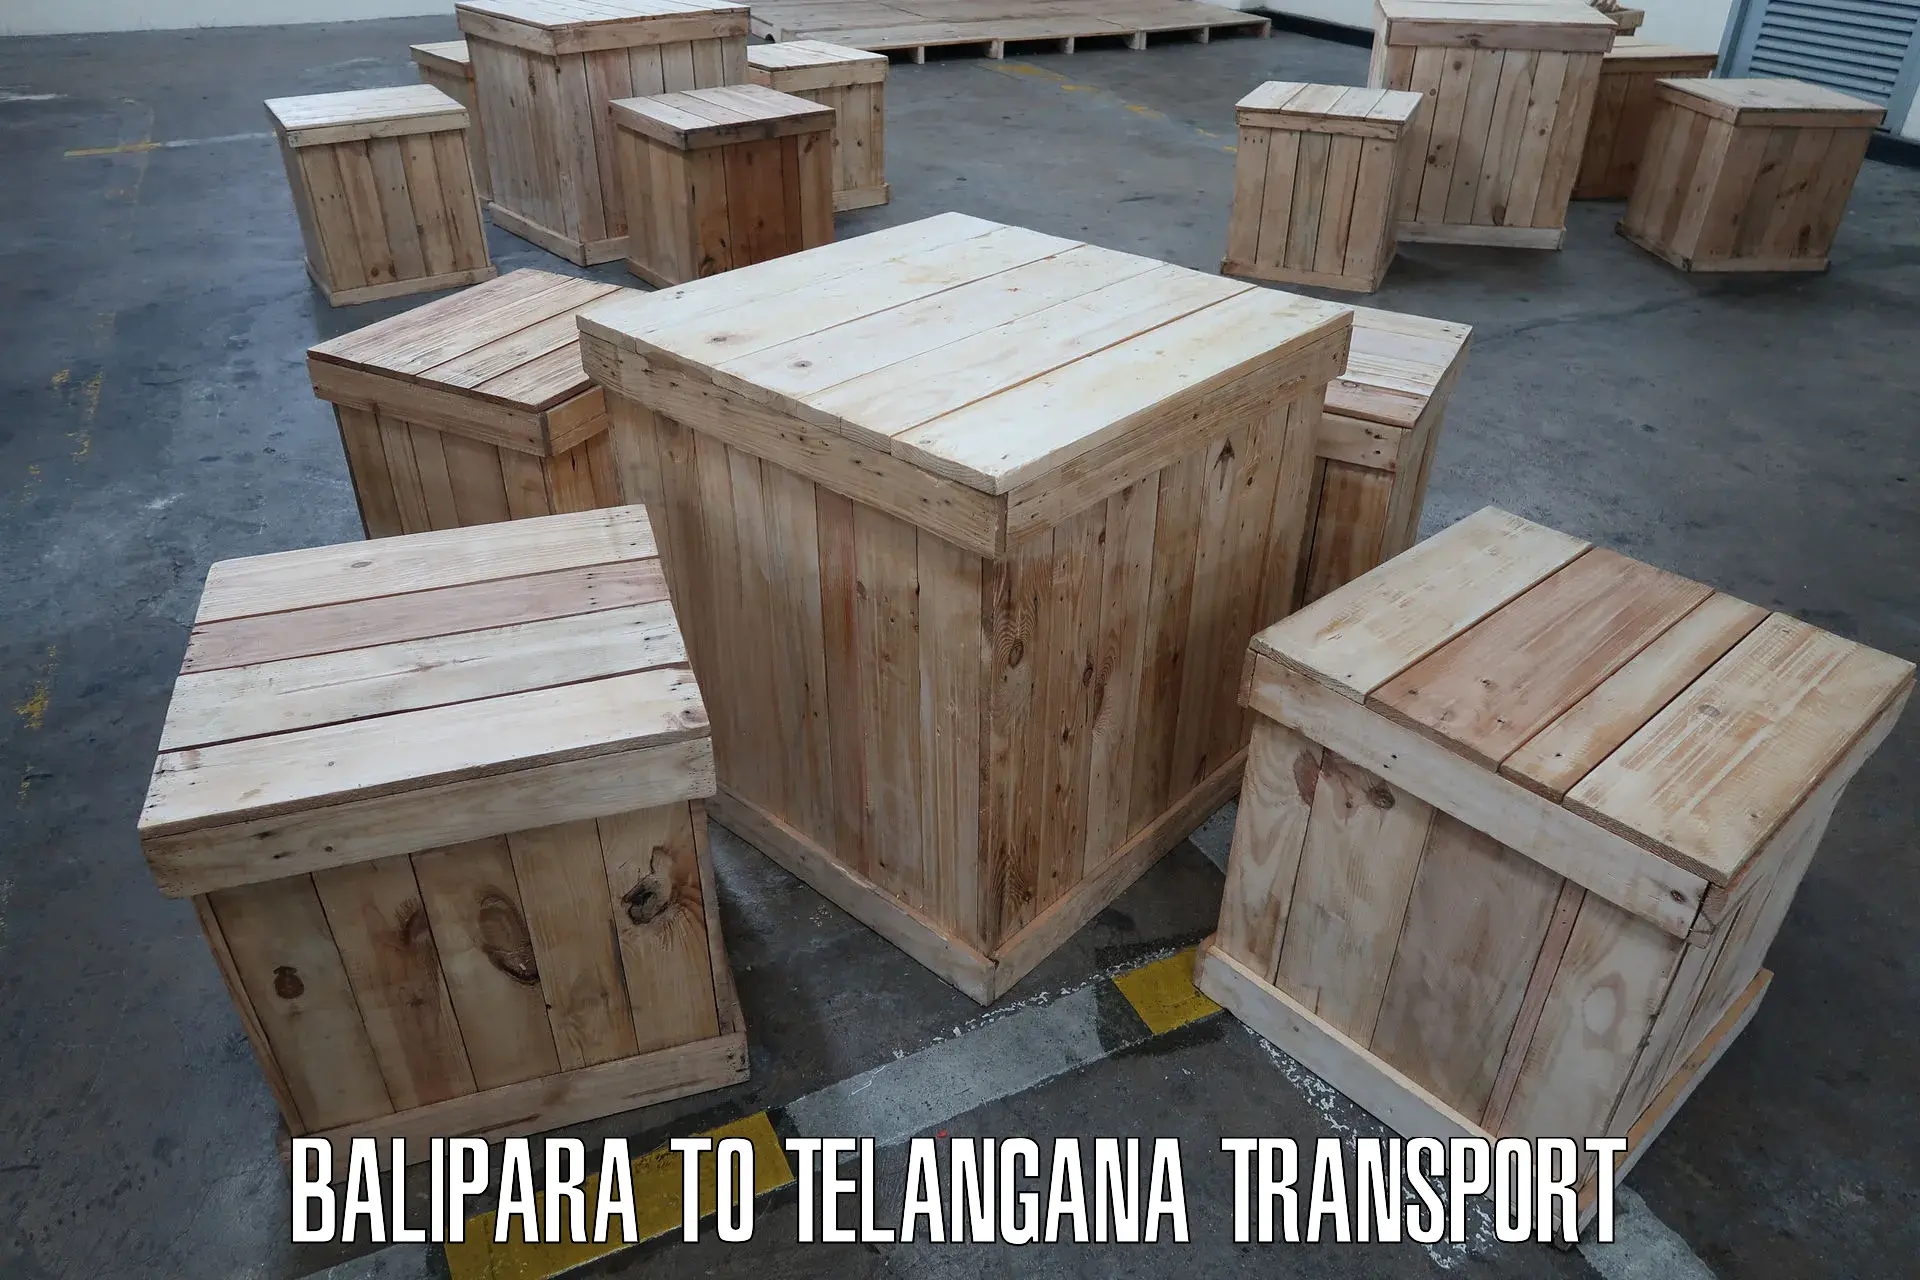 Vehicle transport services in Balipara to Tandur